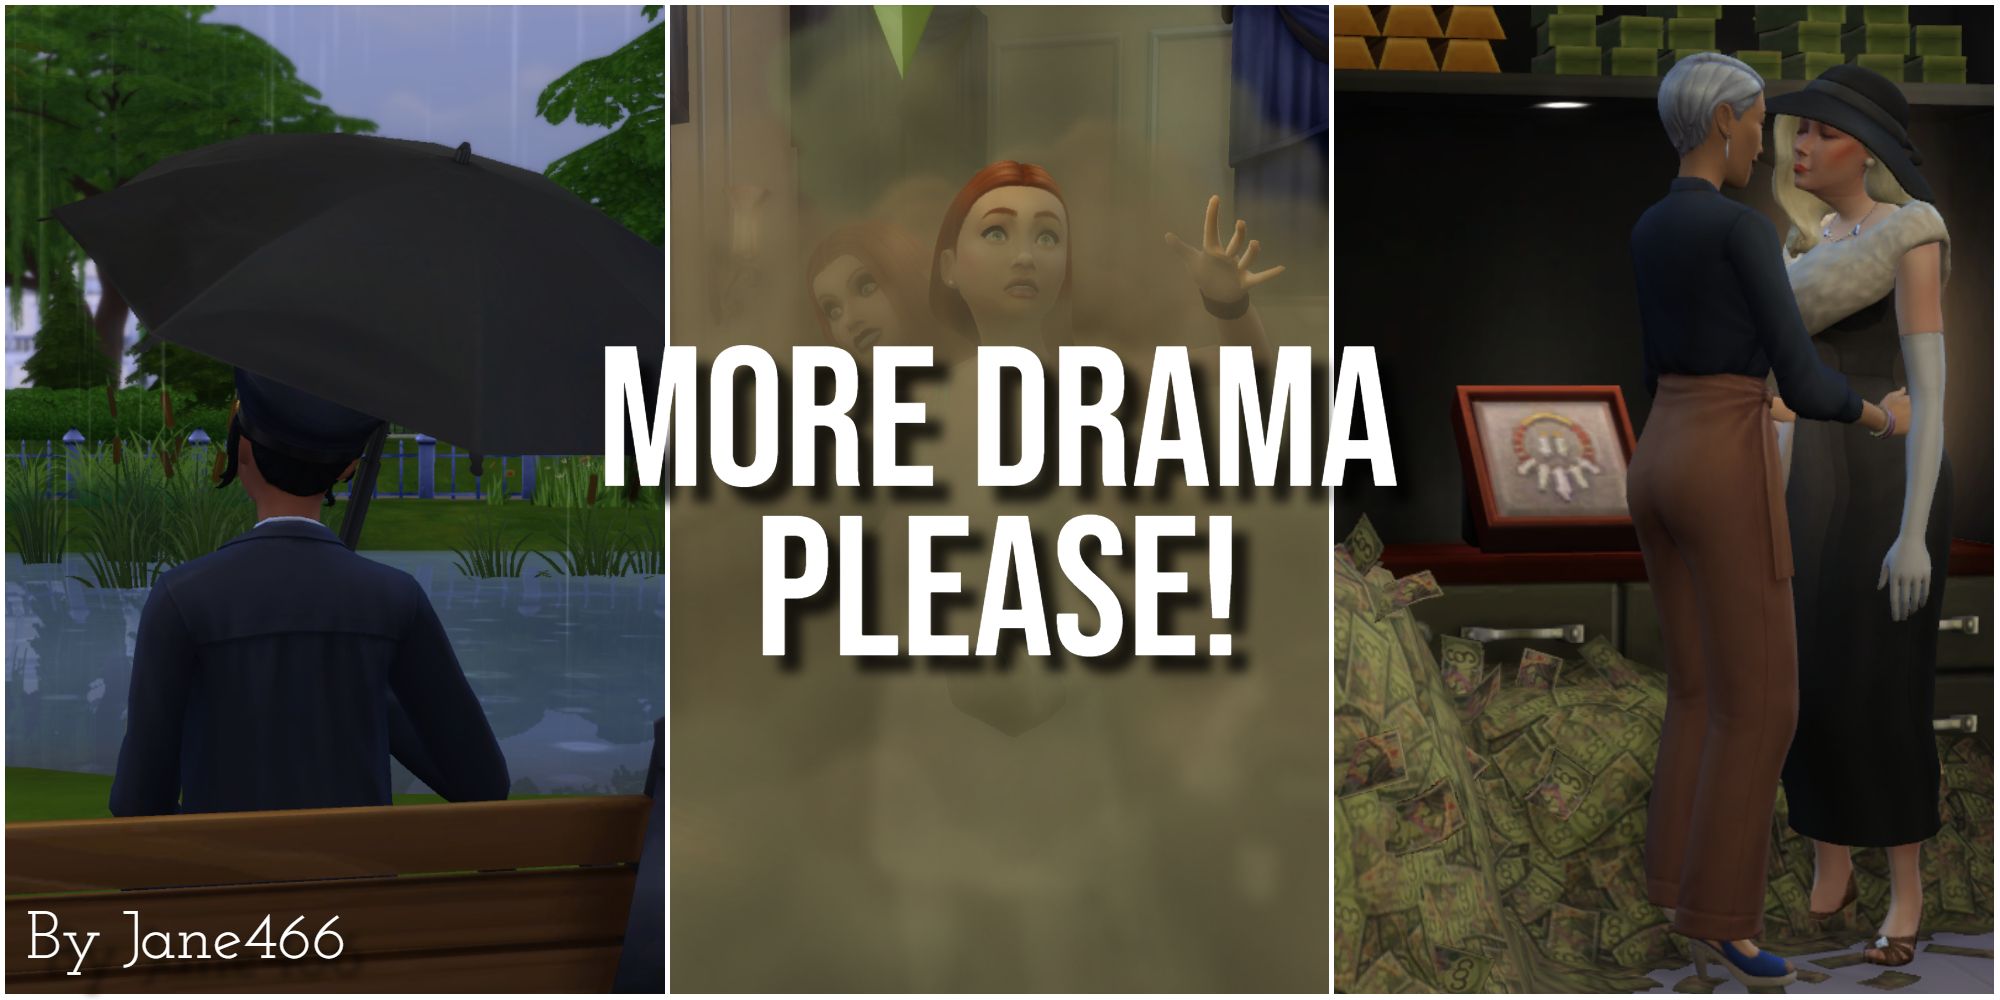 Dramatic screenshots from a save file players can download to spice up their gameplay in The Sims 4